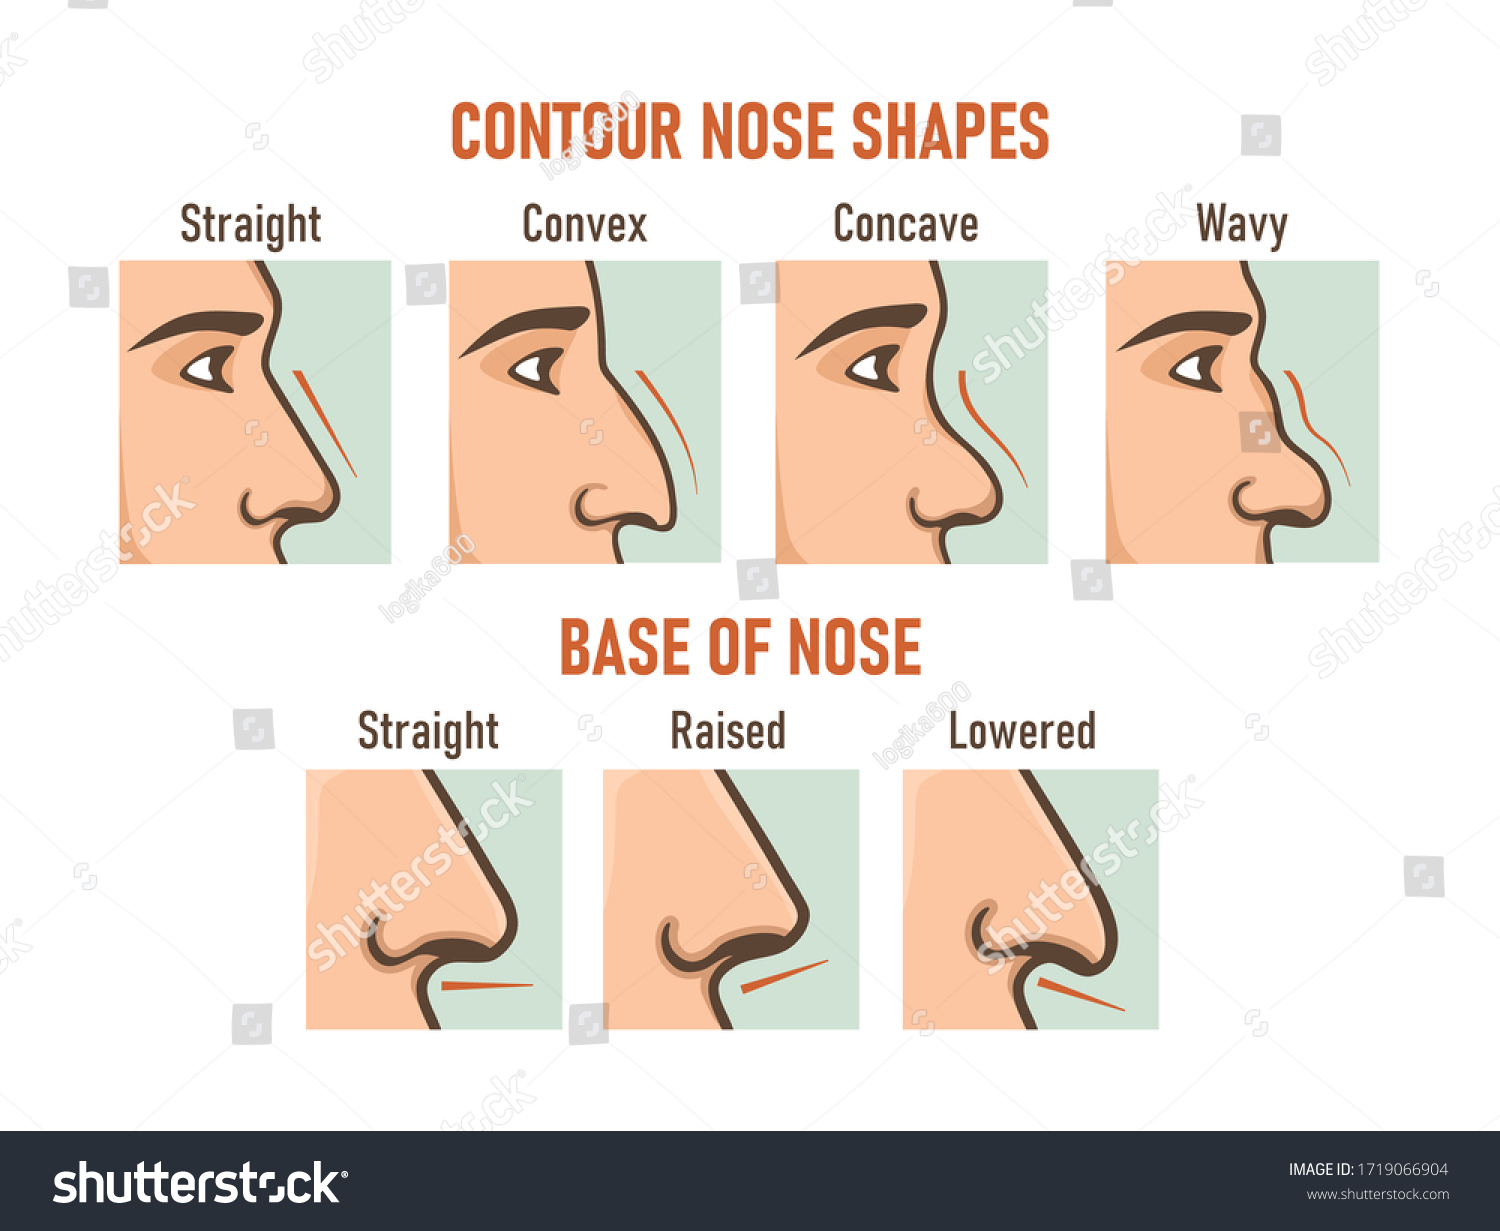 How To Contour Different Nose Shapes - Exactly How To Contour Every ...